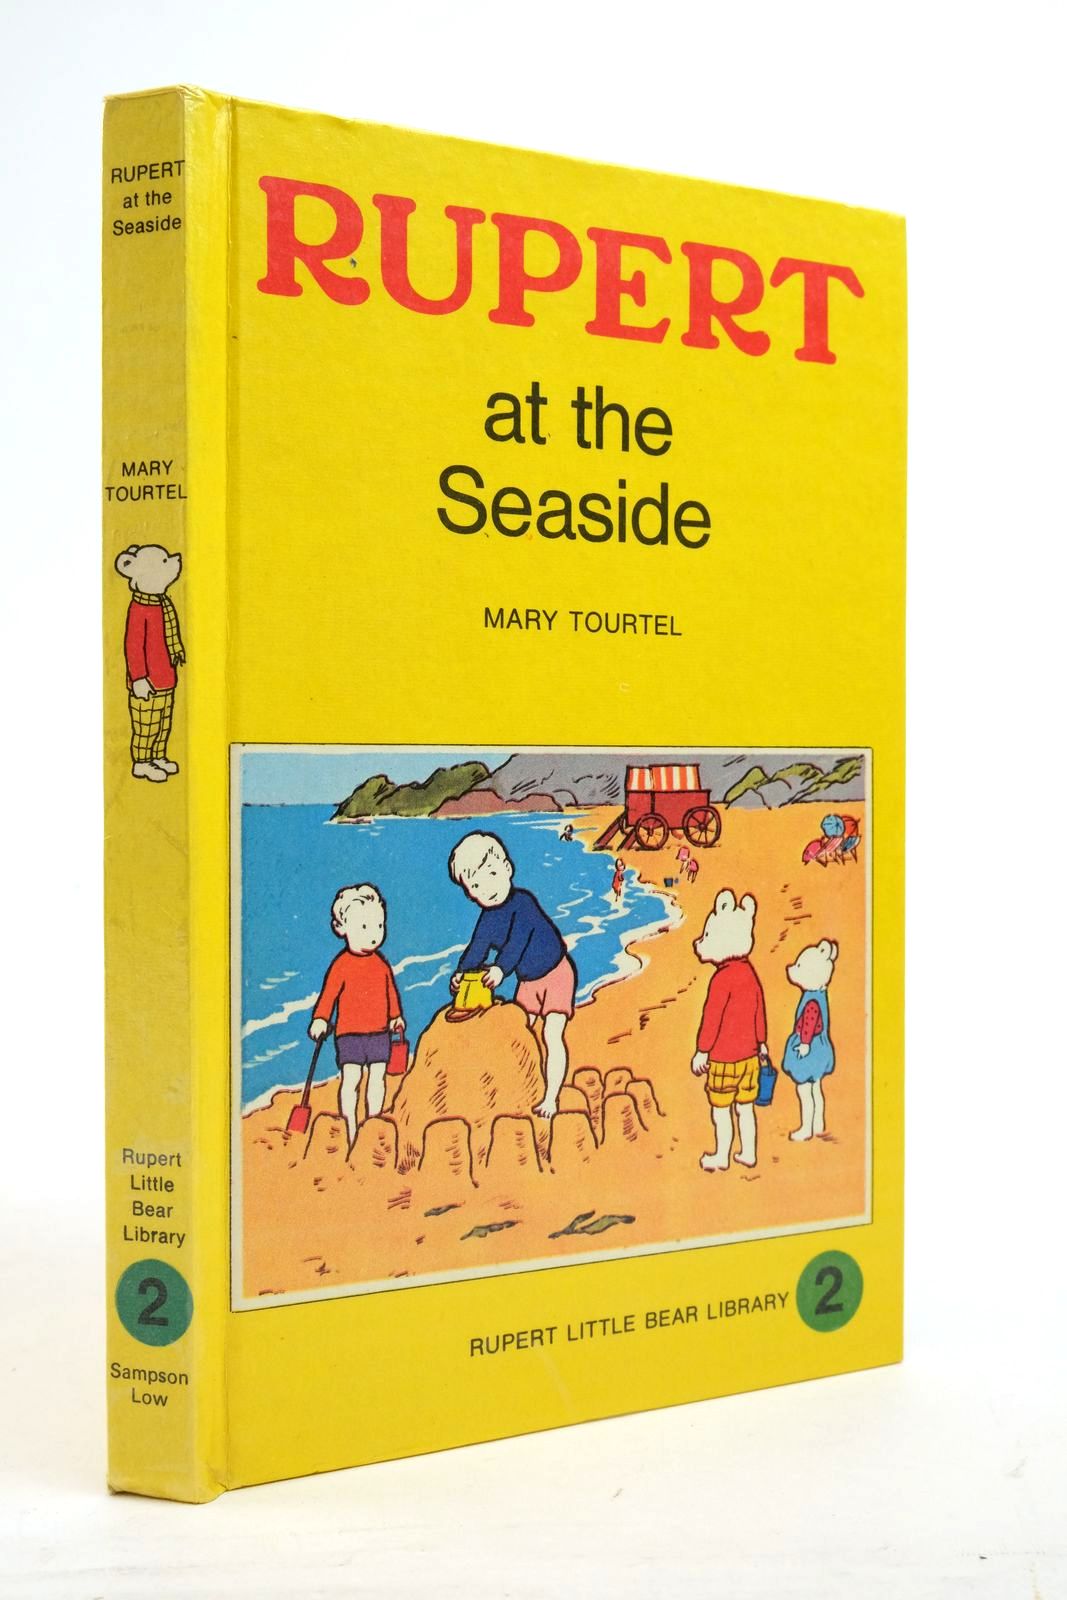 Photo of RUPERT AT THE SEASIDE - RUPERT LITTLE BEAR LIBRARY No. 2 (WOOLWORTH) written by Tourtel, Mary illustrated by Tourtel, Mary published by Sampson Low, Marston &amp; Co. Ltd. (STOCK CODE: 2136969)  for sale by Stella & Rose's Books